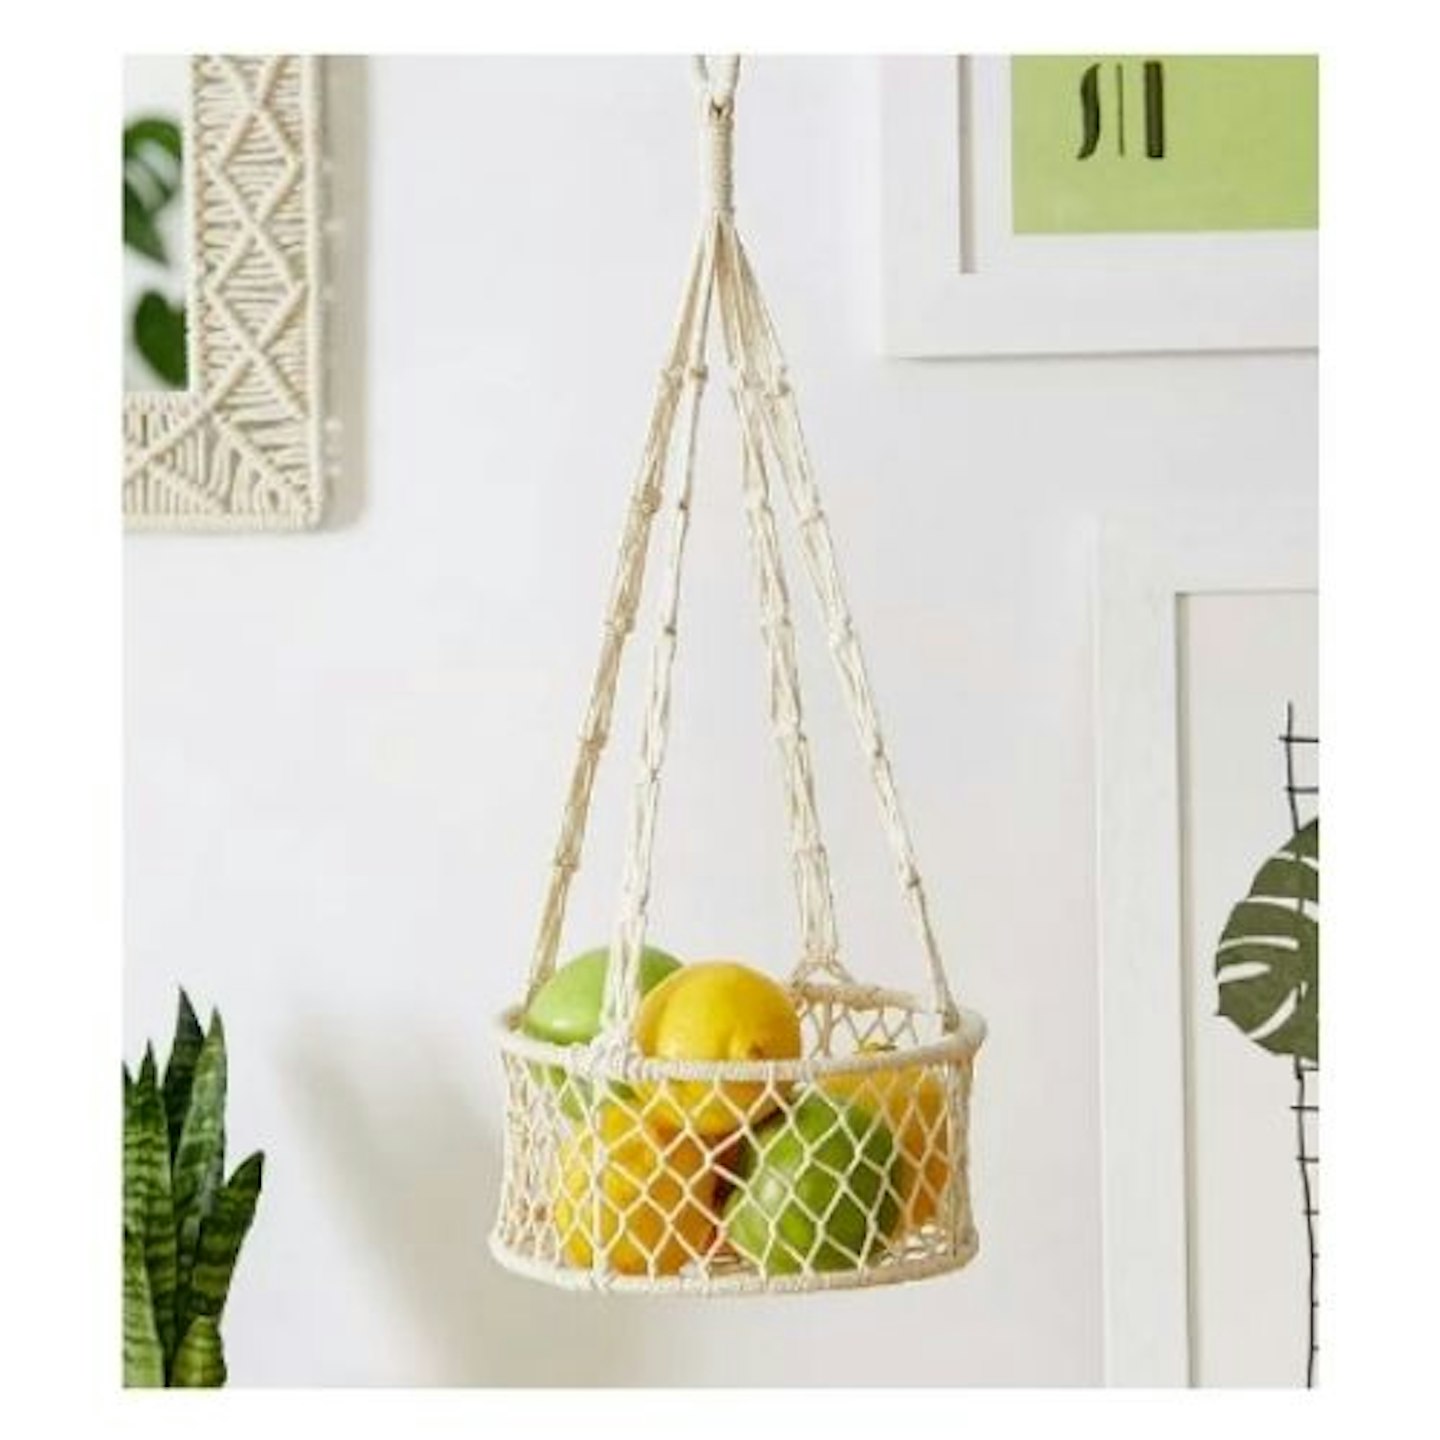 Hanging Woven Basket with fruit in